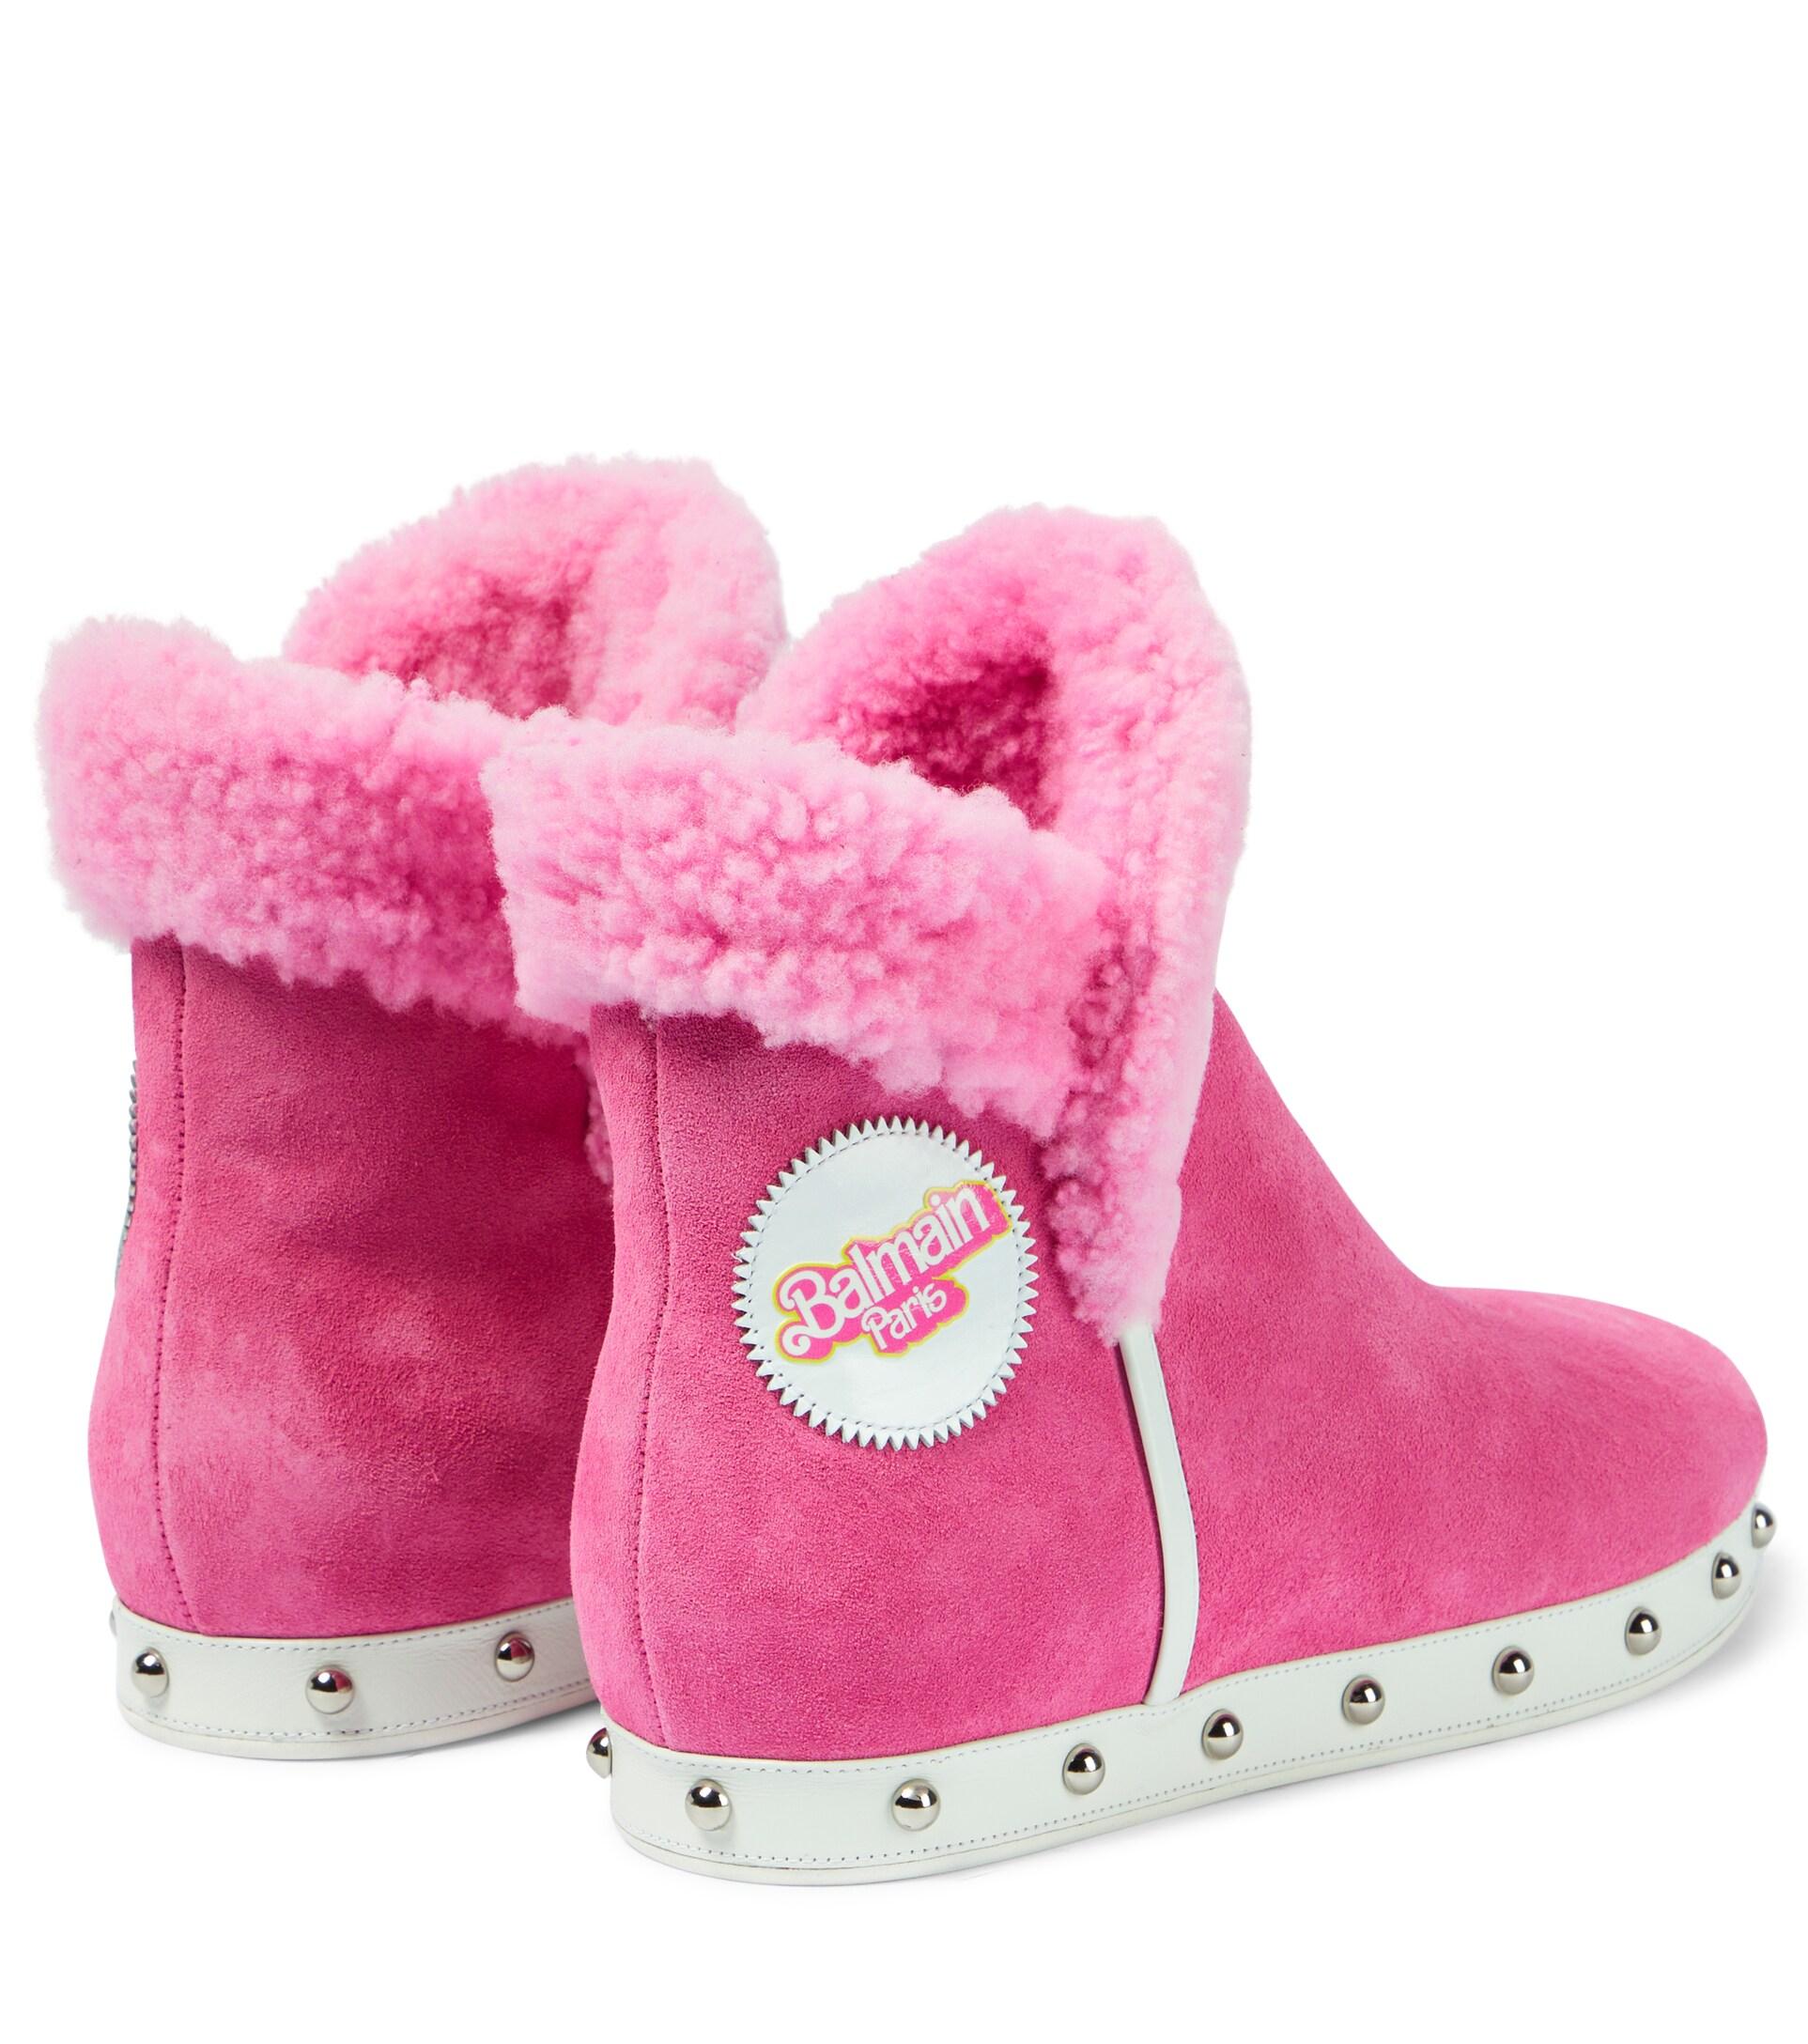 Balmain X Barbie ® Urra Shearling-lined Suede Boots in Pink | Lyst